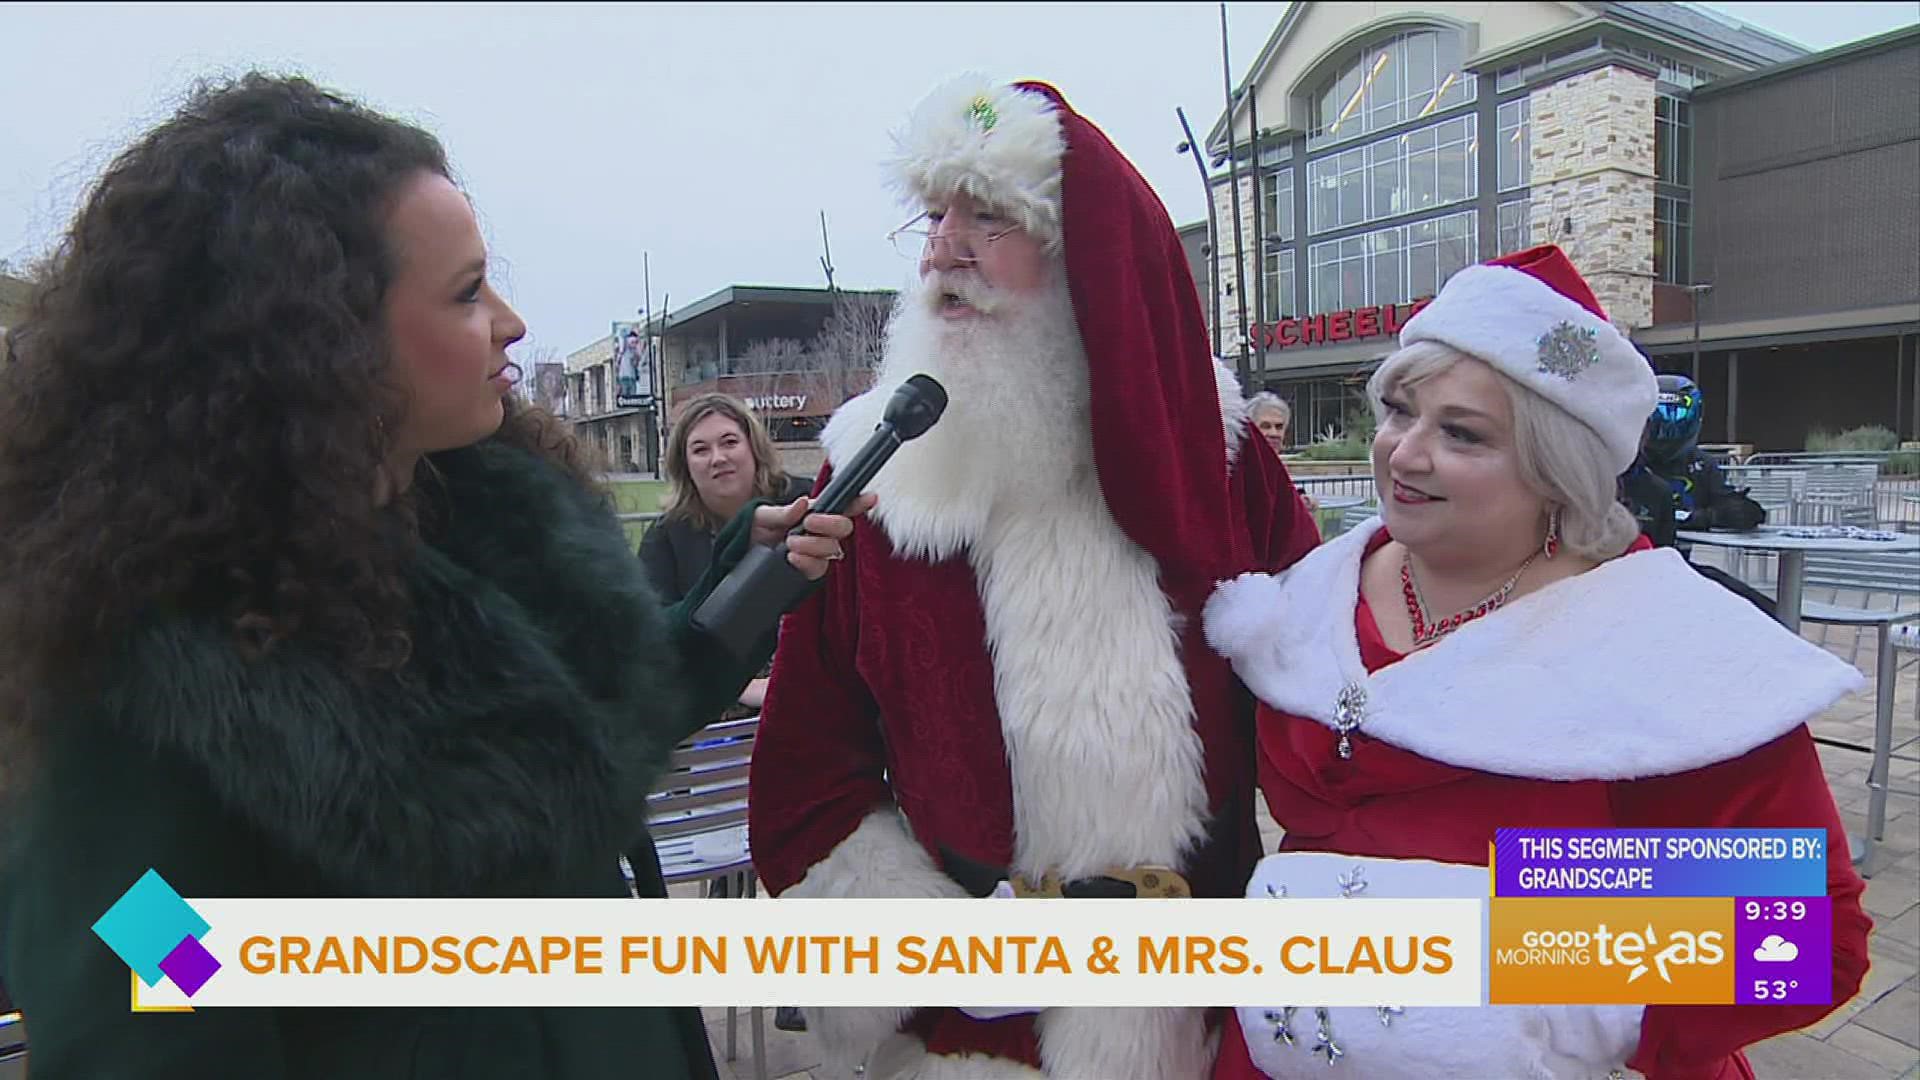 Santa & Mrs. Claus stop by Grandscape to talk about their hopes for this holiday season. This segment is sponsored by Grandscape. Go to grandscape.com for more info.